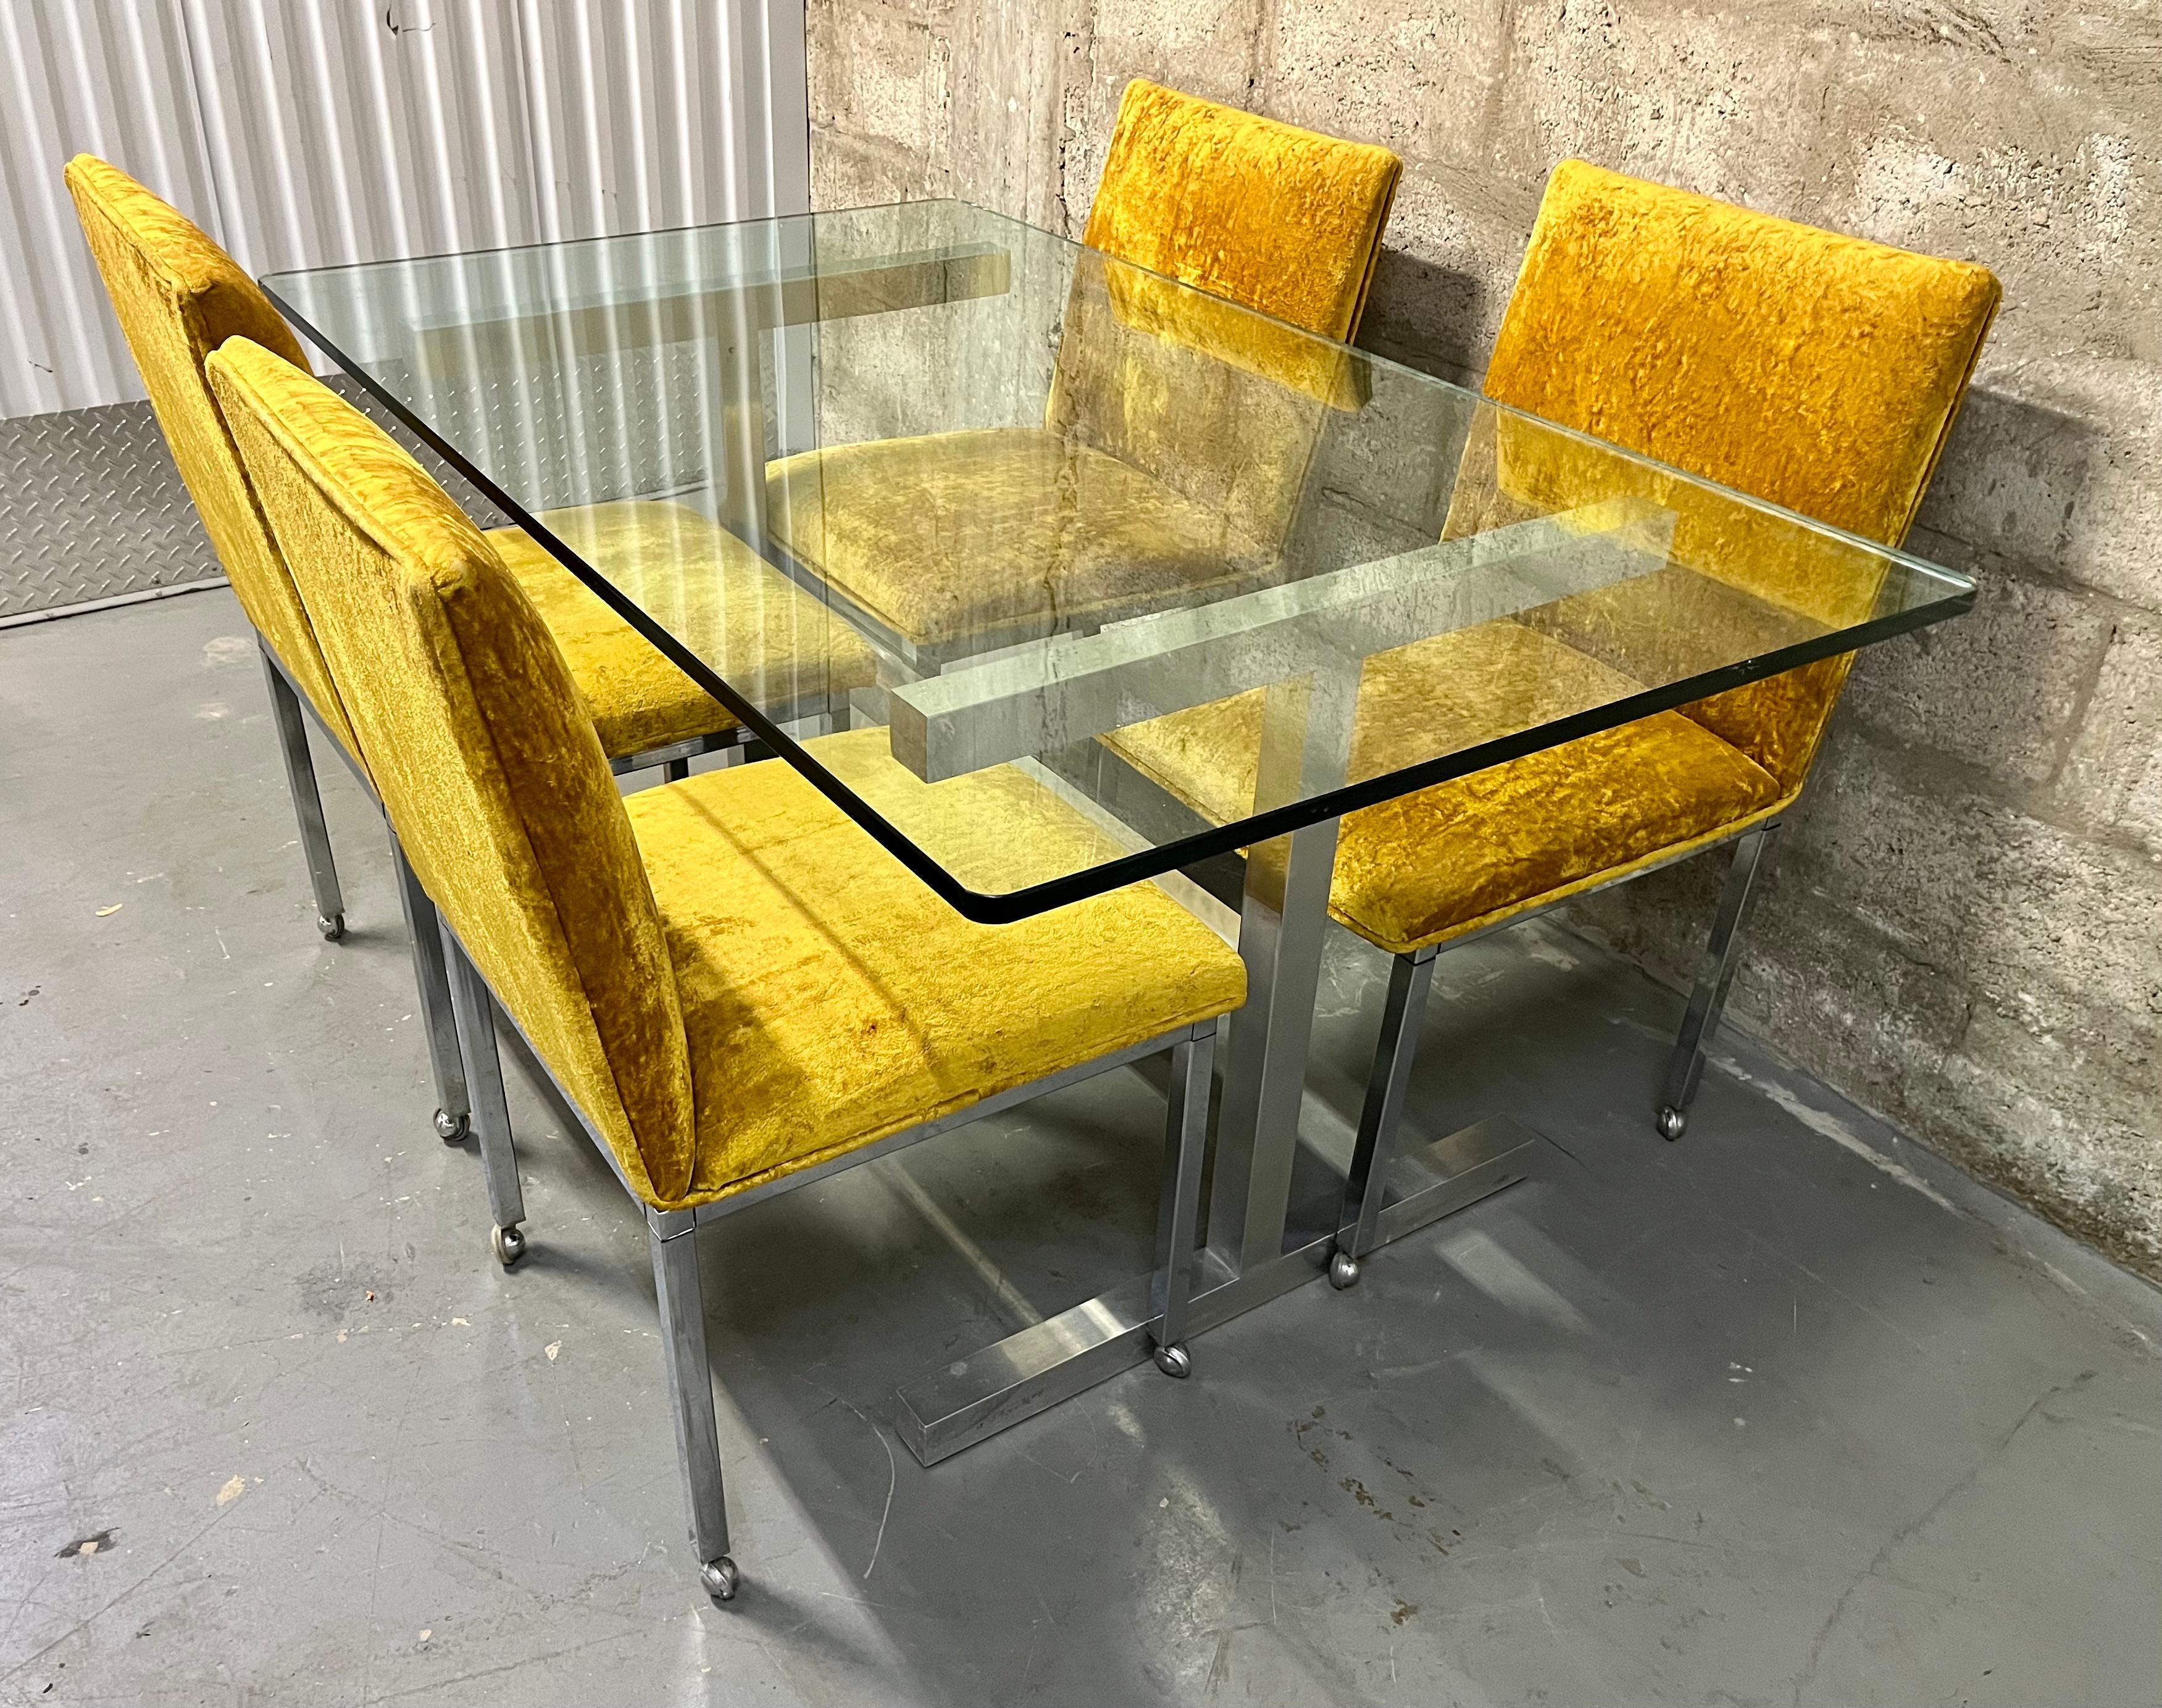 Aluminum 1970s Mid Century Modern Chrome Dining Room Set in the Milo Baughman Style. For Sale